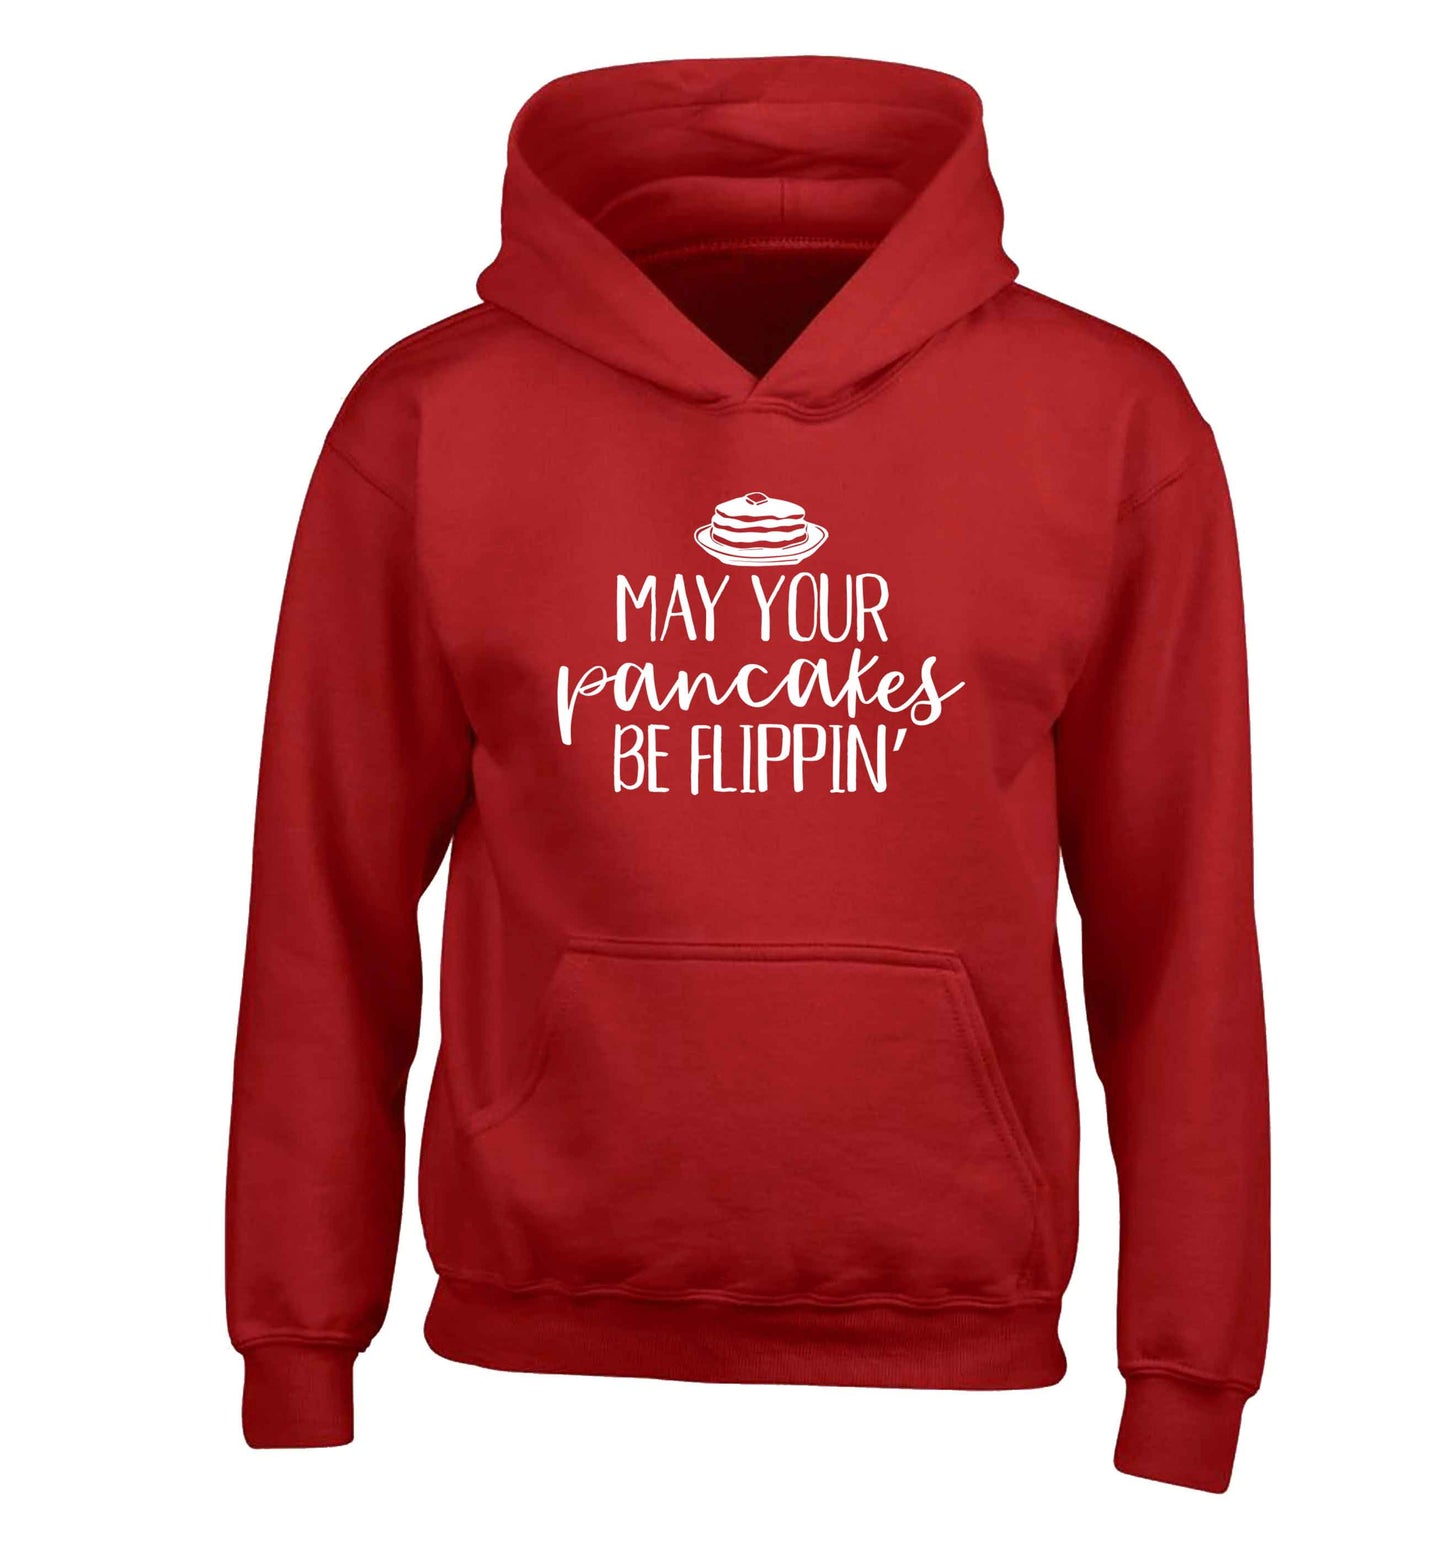 May your pancakes be flippin' children's red hoodie 12-13 Years